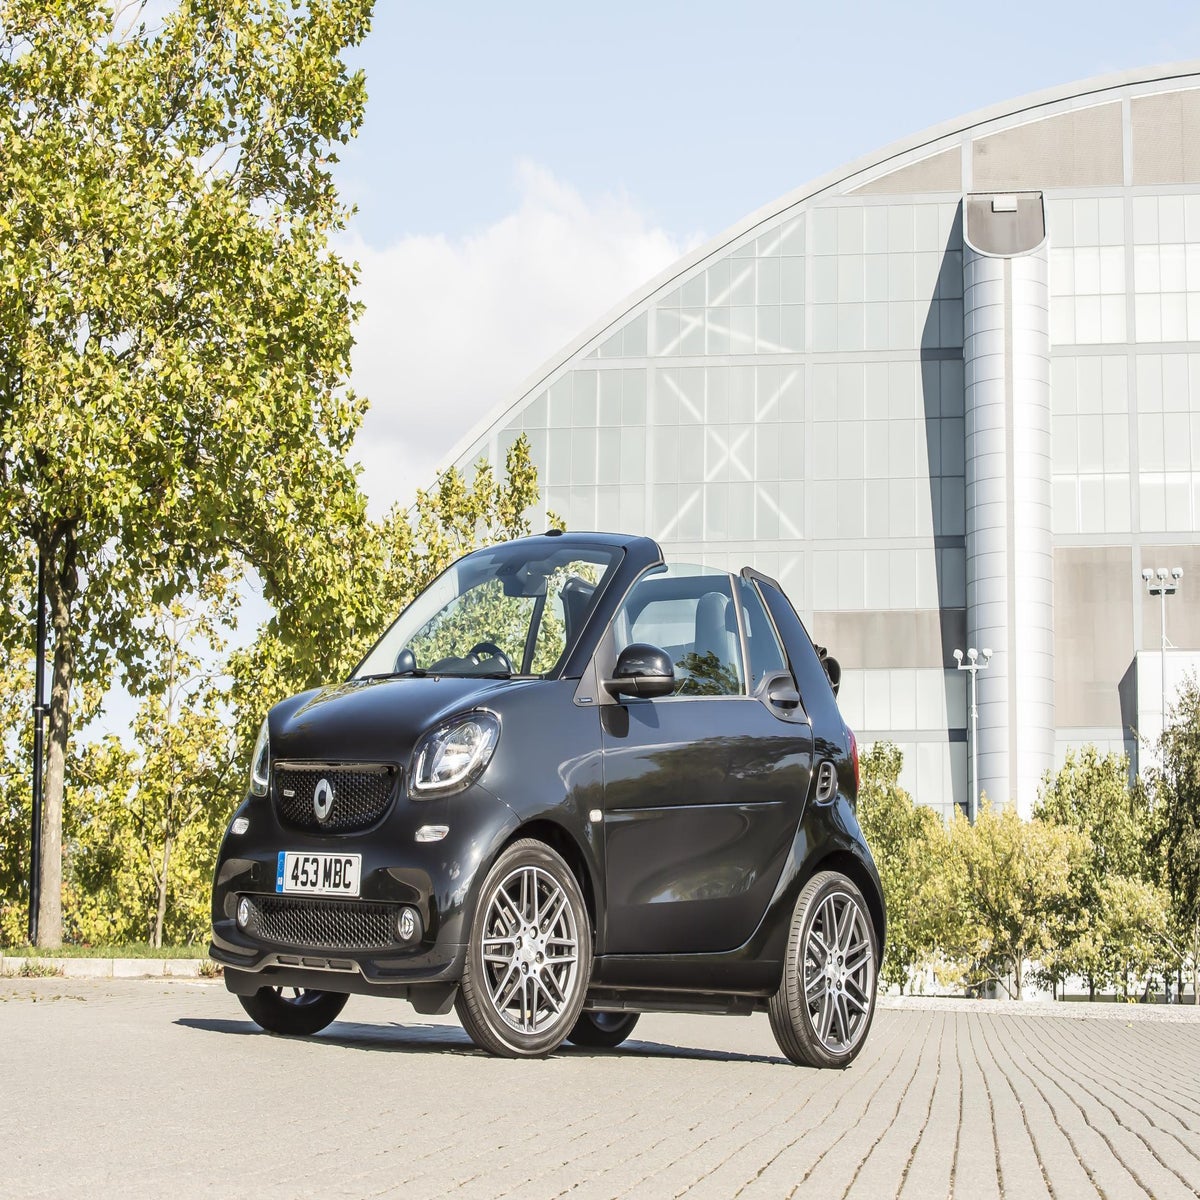 https://static.independent.co.uk/s3fs-public/thumbnails/image/2017/07/31/15/smart-fortwo-cabrio-brabus-f34.jpg?width=1200&height=1200&fit=crop